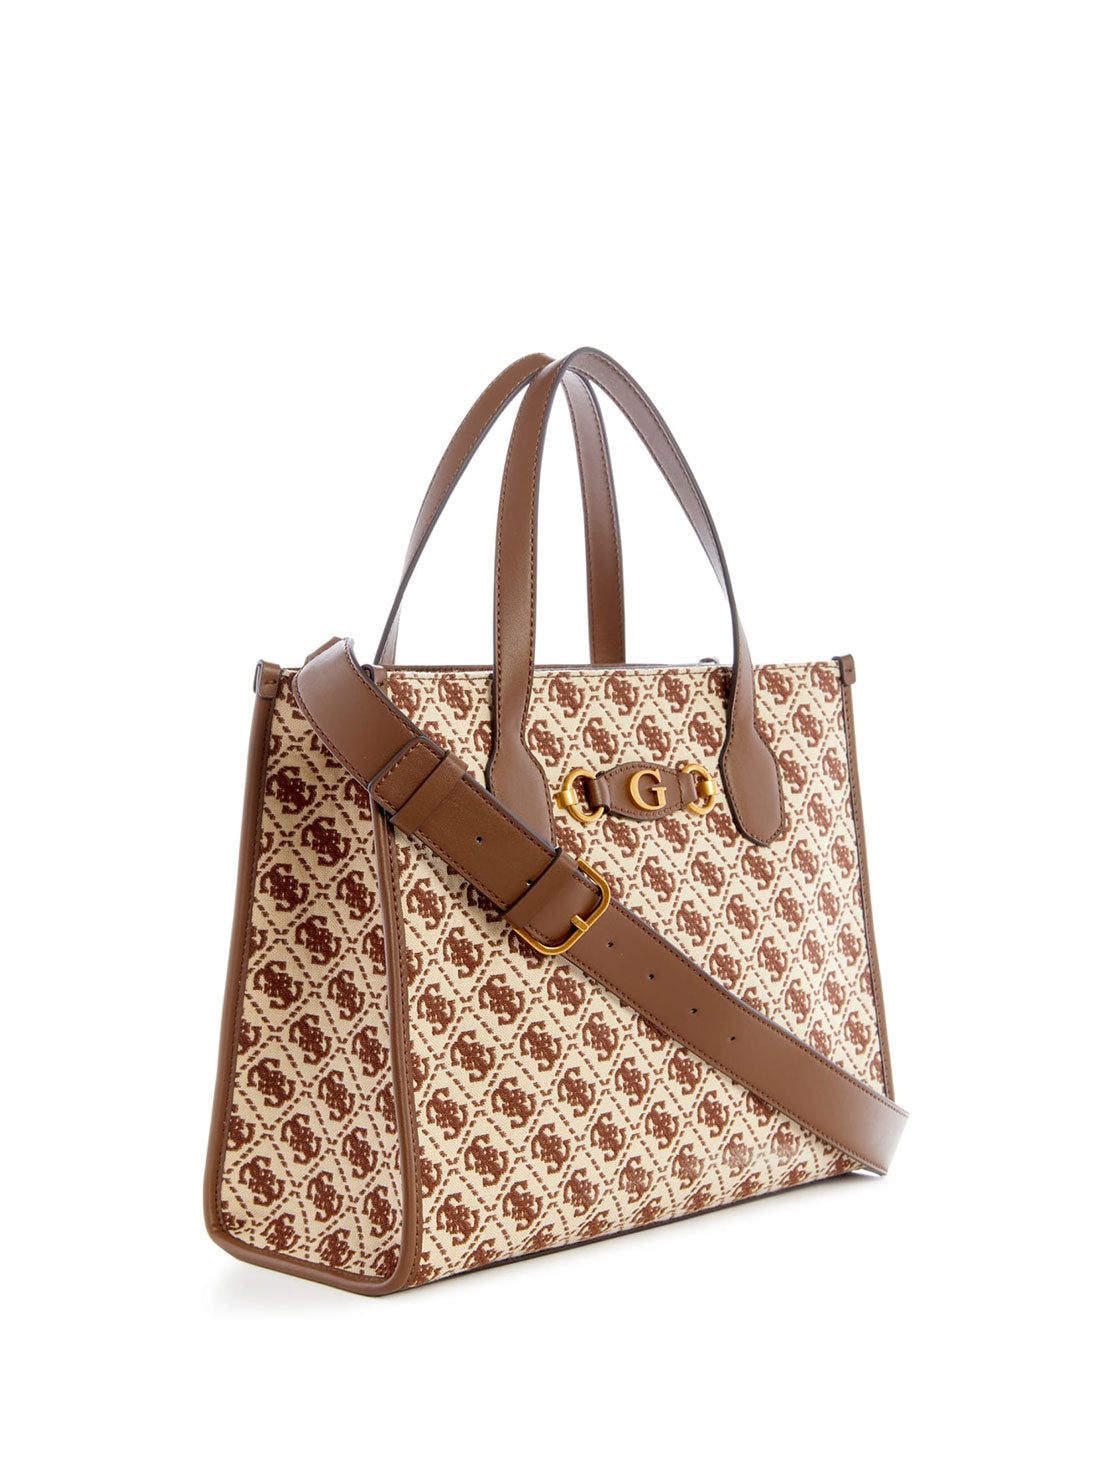 GUESS Women's Brown Logo Izzy Tote Bag JB865422 Angle View